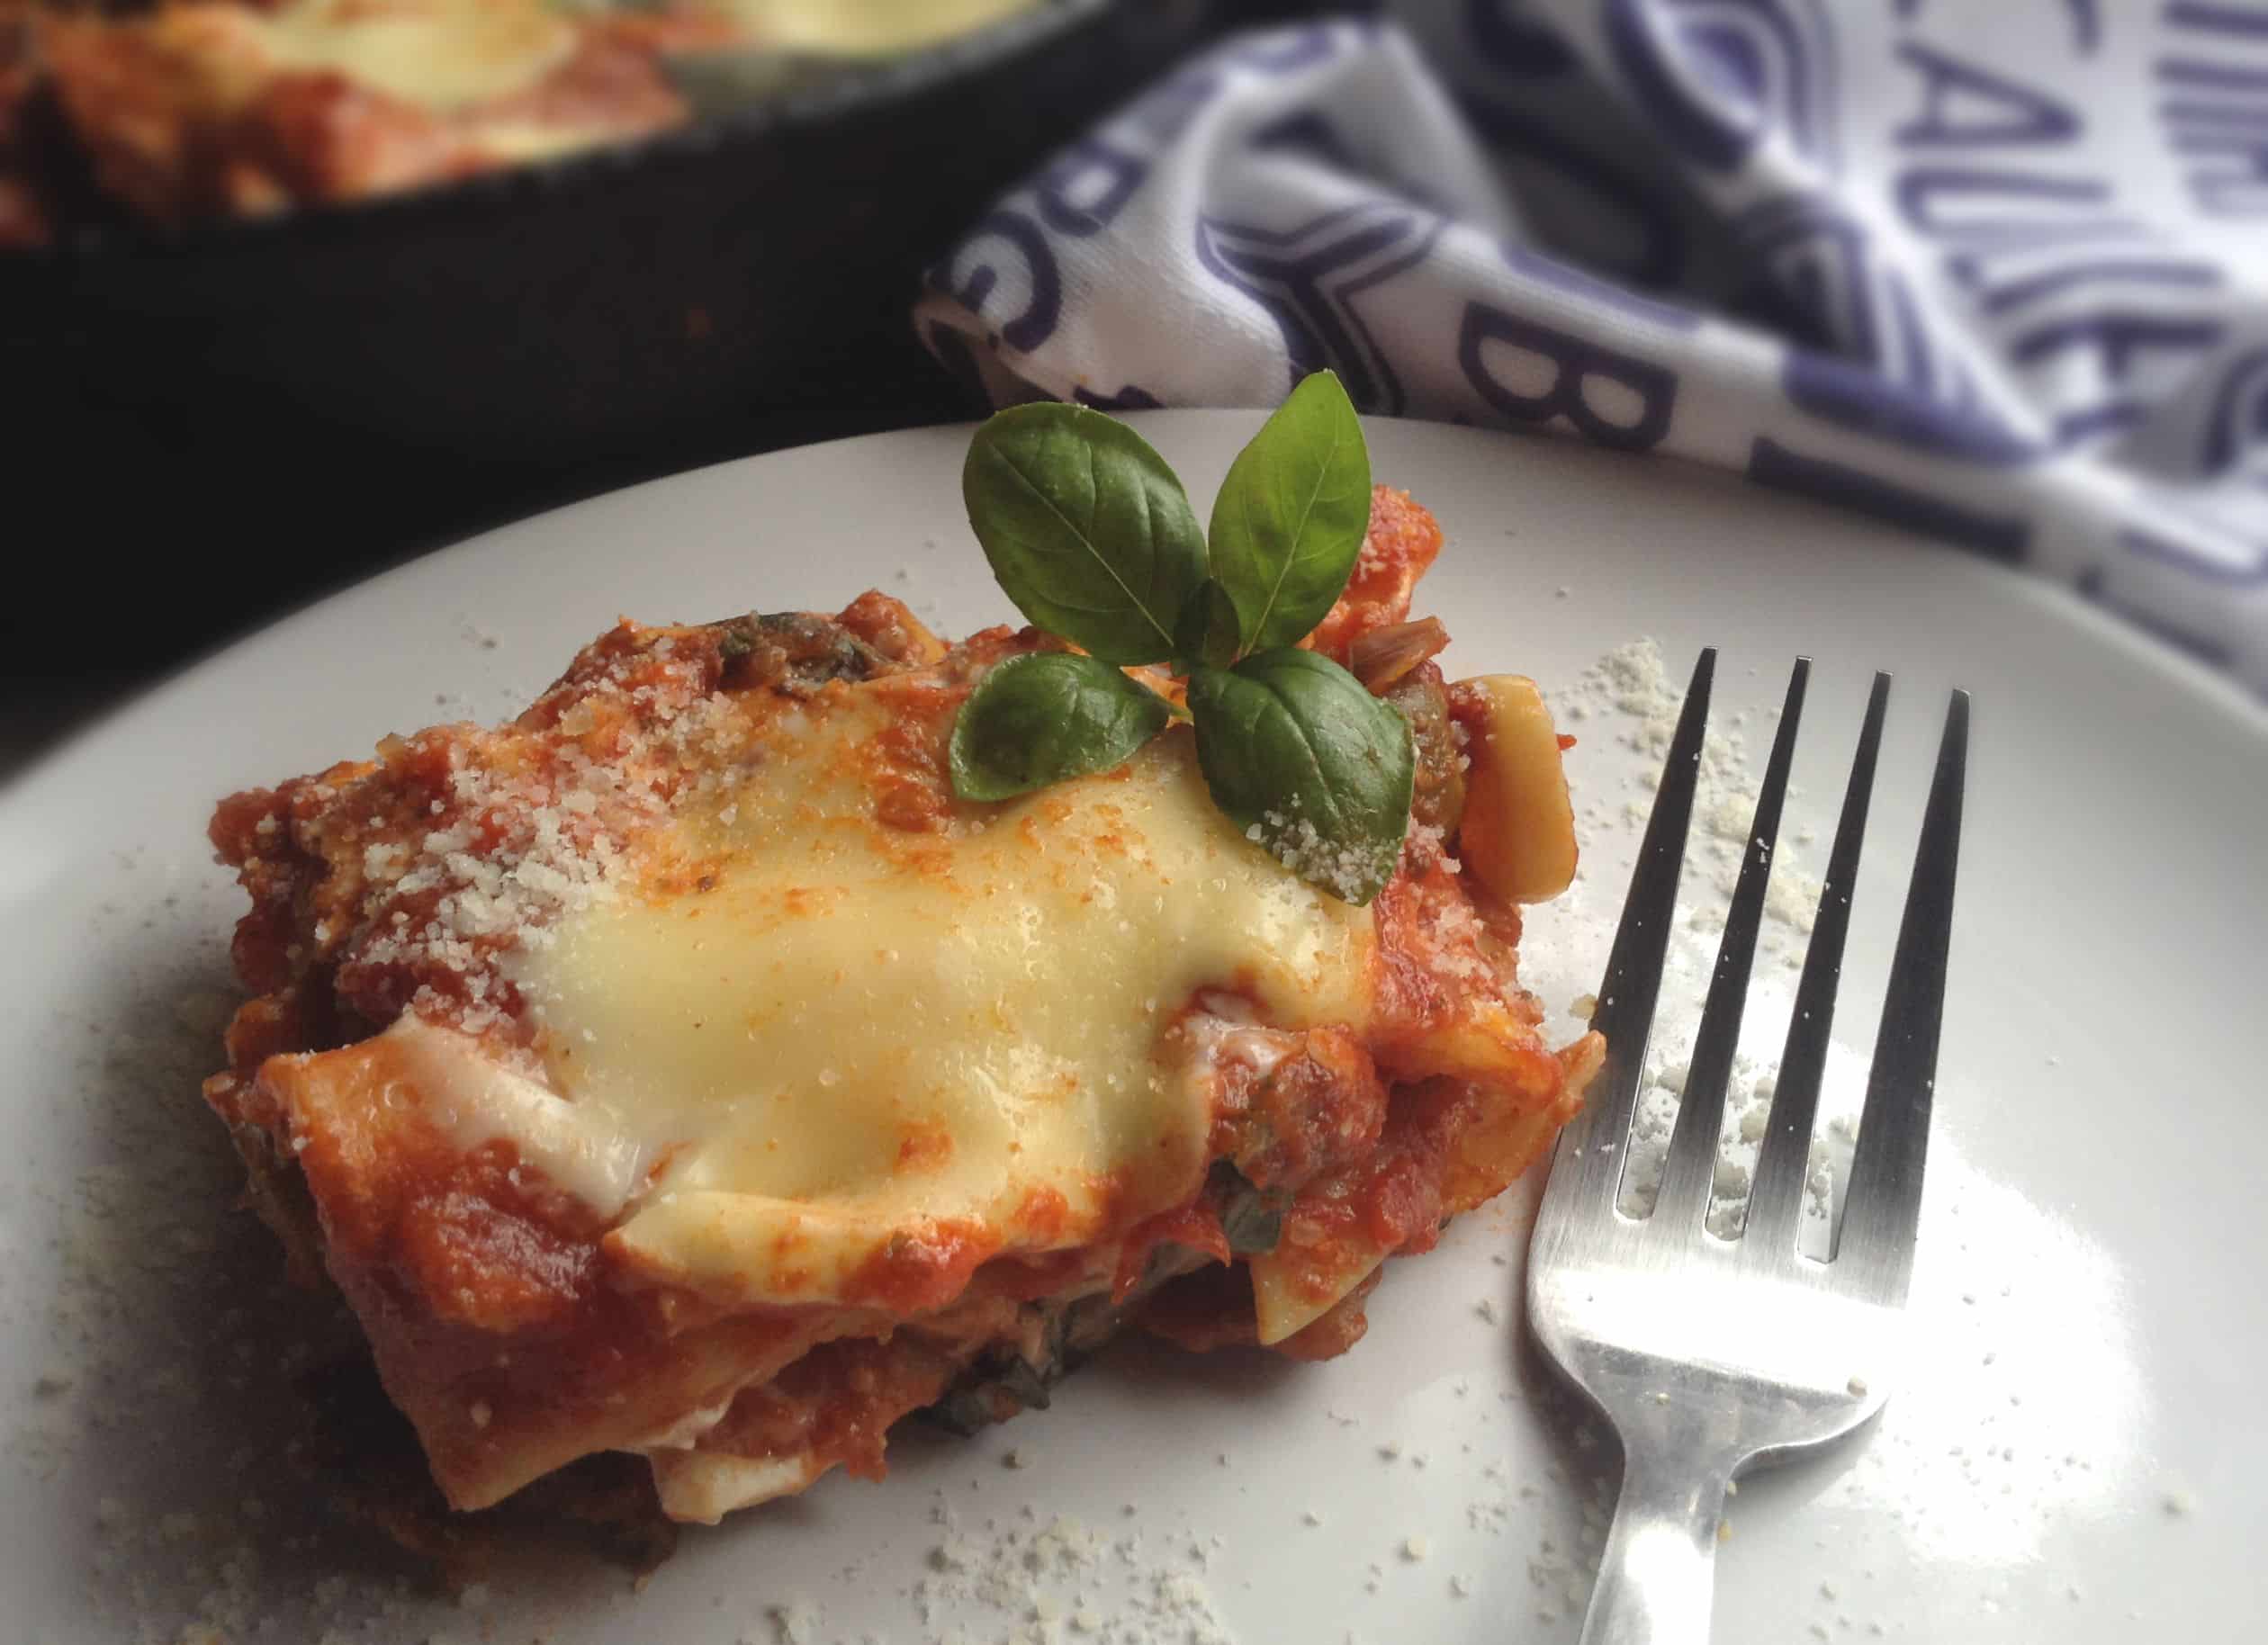 Quick and easy to make in just 30 minutes, Stove Top Vegetable Lasagna is a one pot dinner that is hearty and comforting.